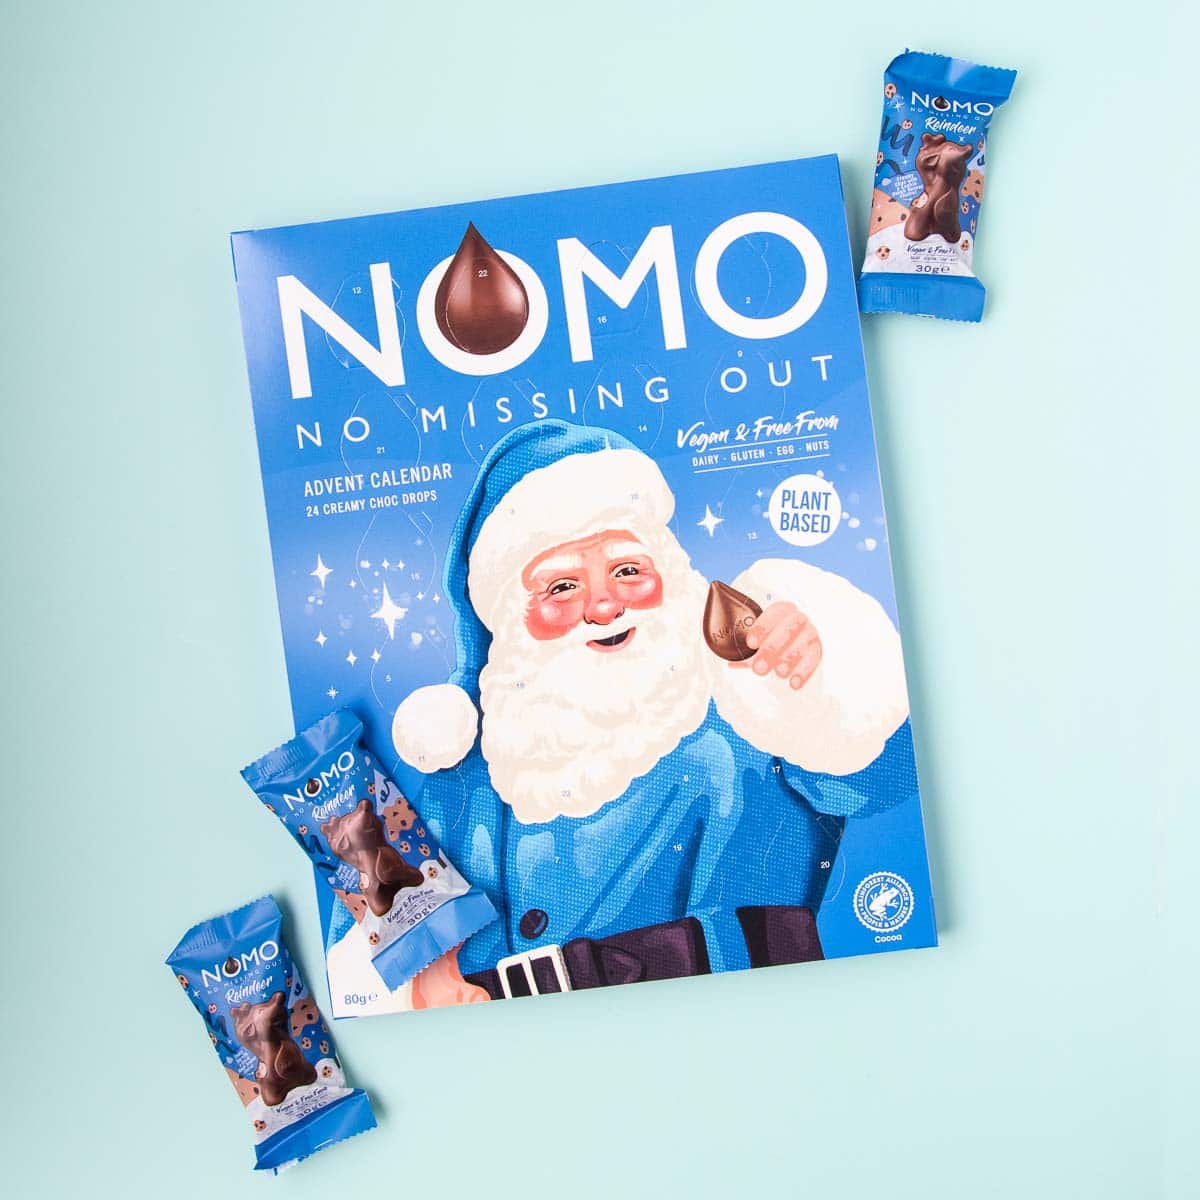 A blue NOMO brand advent calendar with three NOMO chocolate reindeer, on a mint green background.